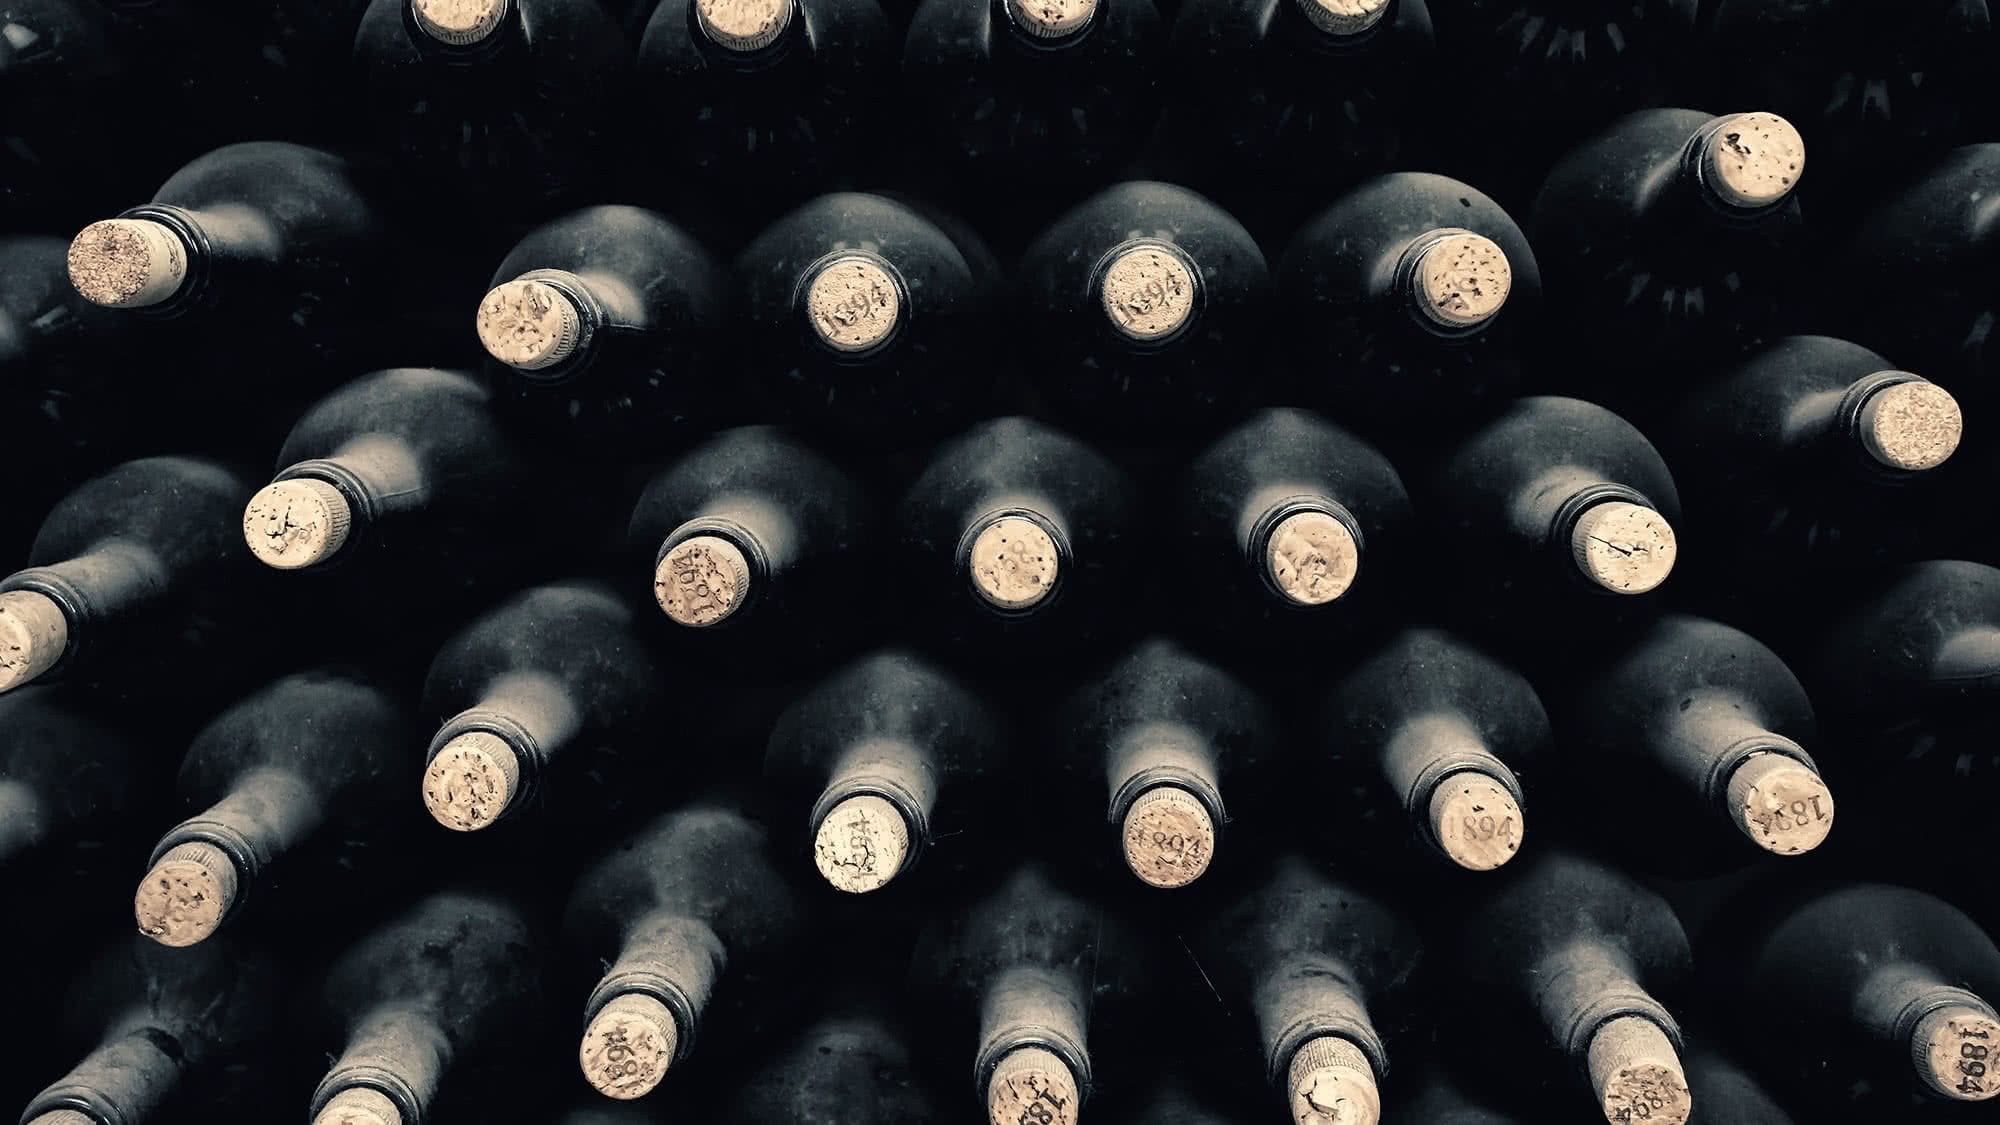 Wine storage: what wines are suitable for storage?